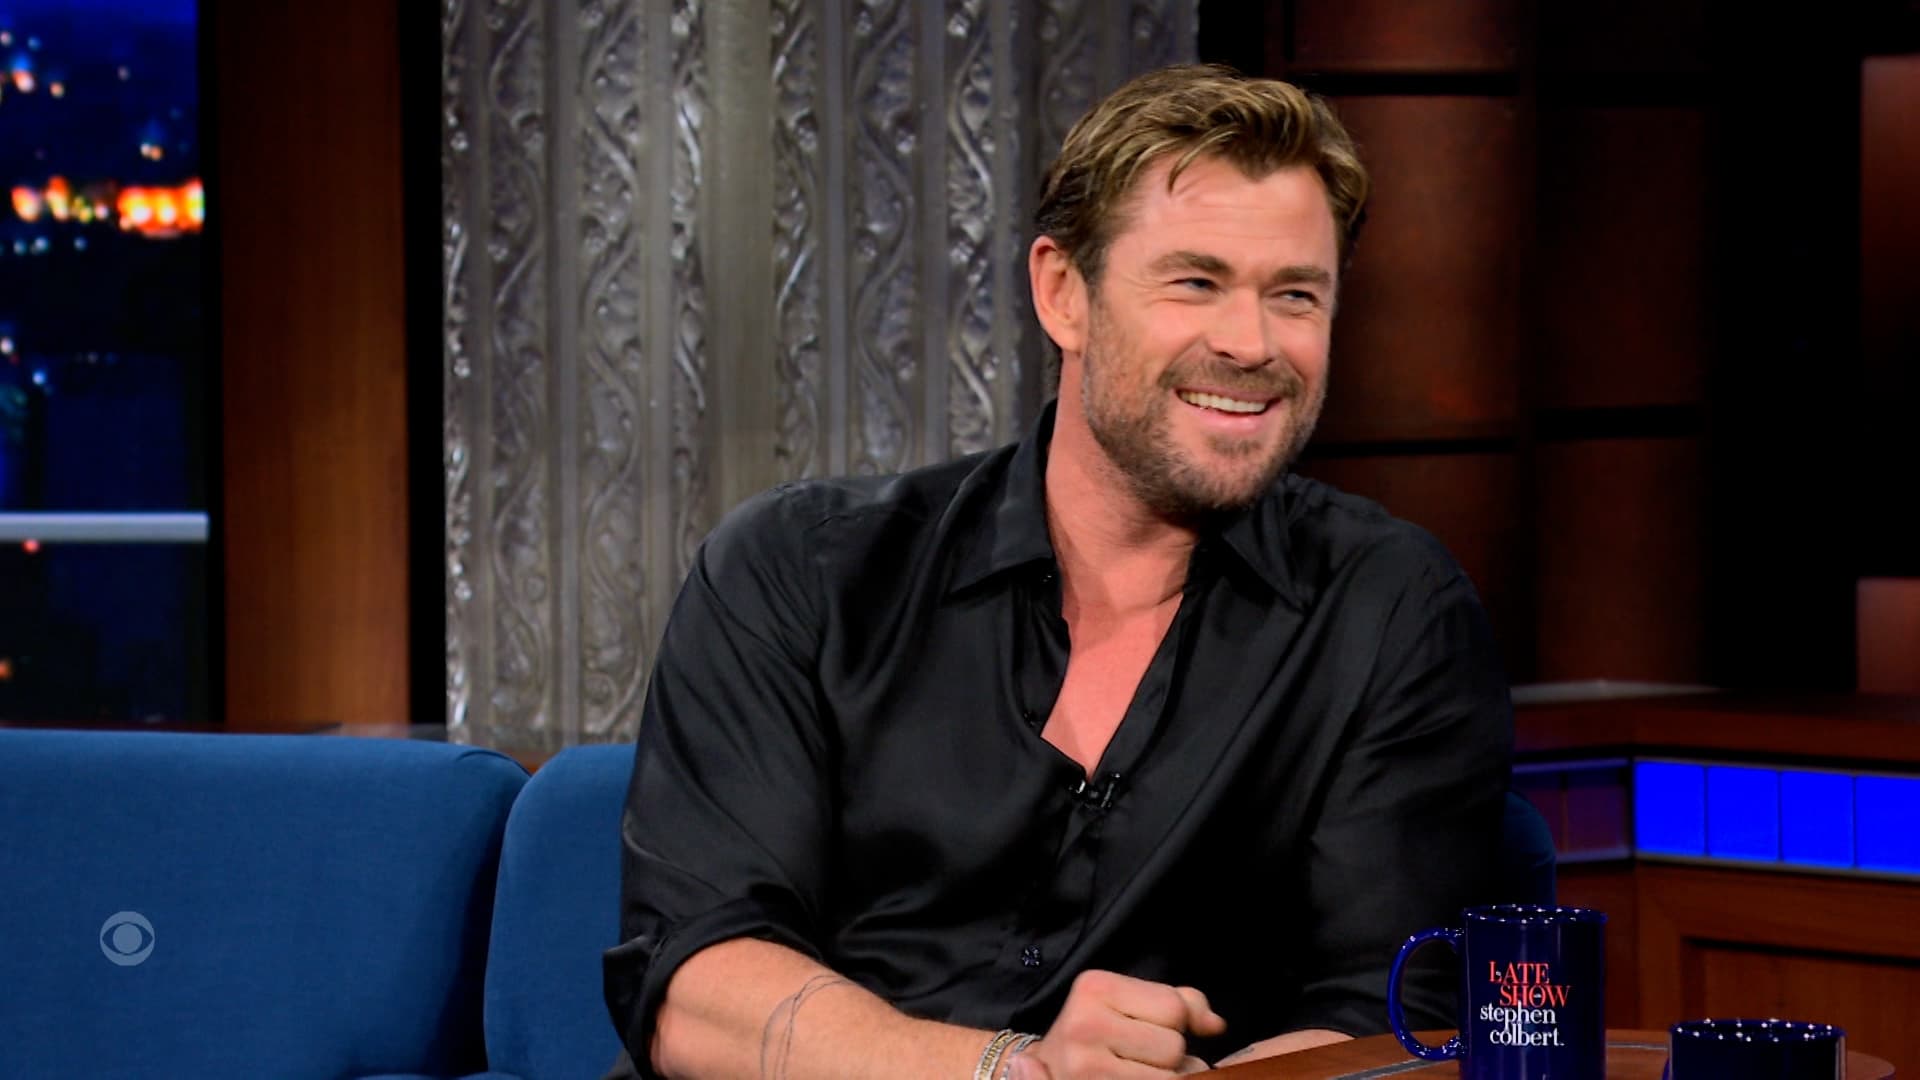 The Late Show with Stephen Colbert Season 9 :Episode 98  5/23/24 (Chris Hemsworth, James Dyson)